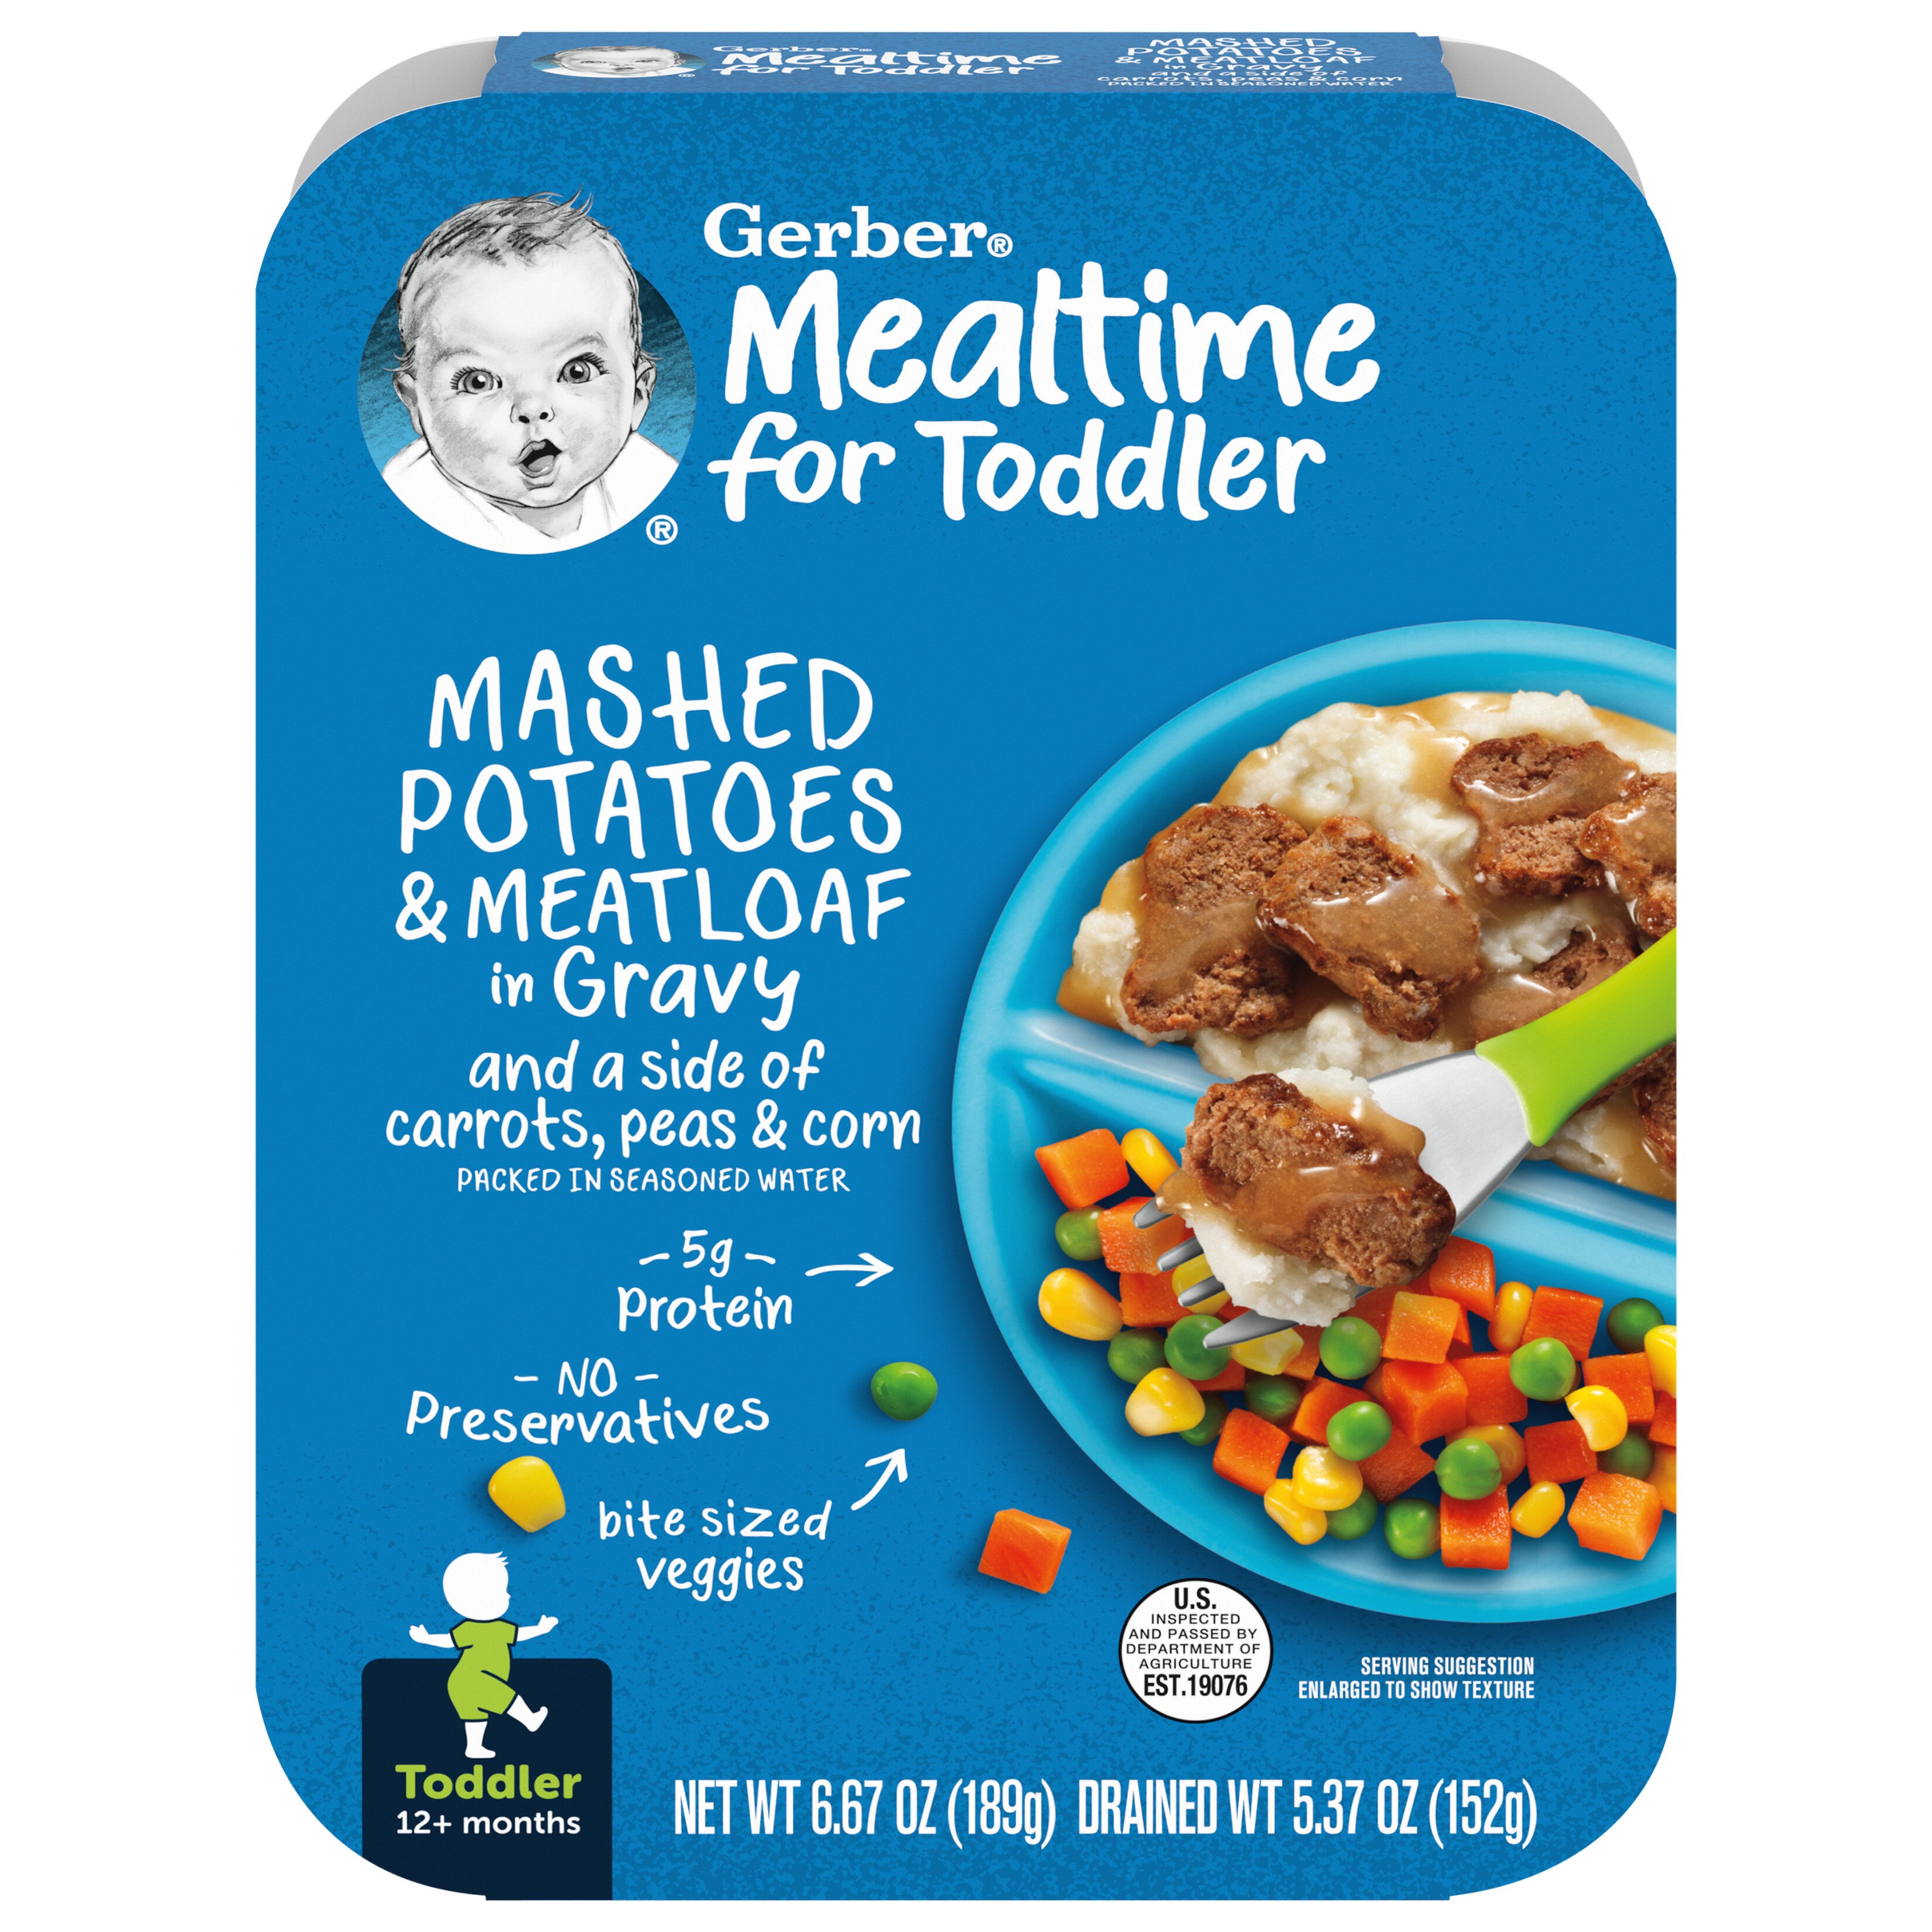 Gerber Mealtime for Toddler, Yellow Rice and Chicken with Vegetables in Sauce Toddler Food, 6.67 oz Tray (8 Pack)